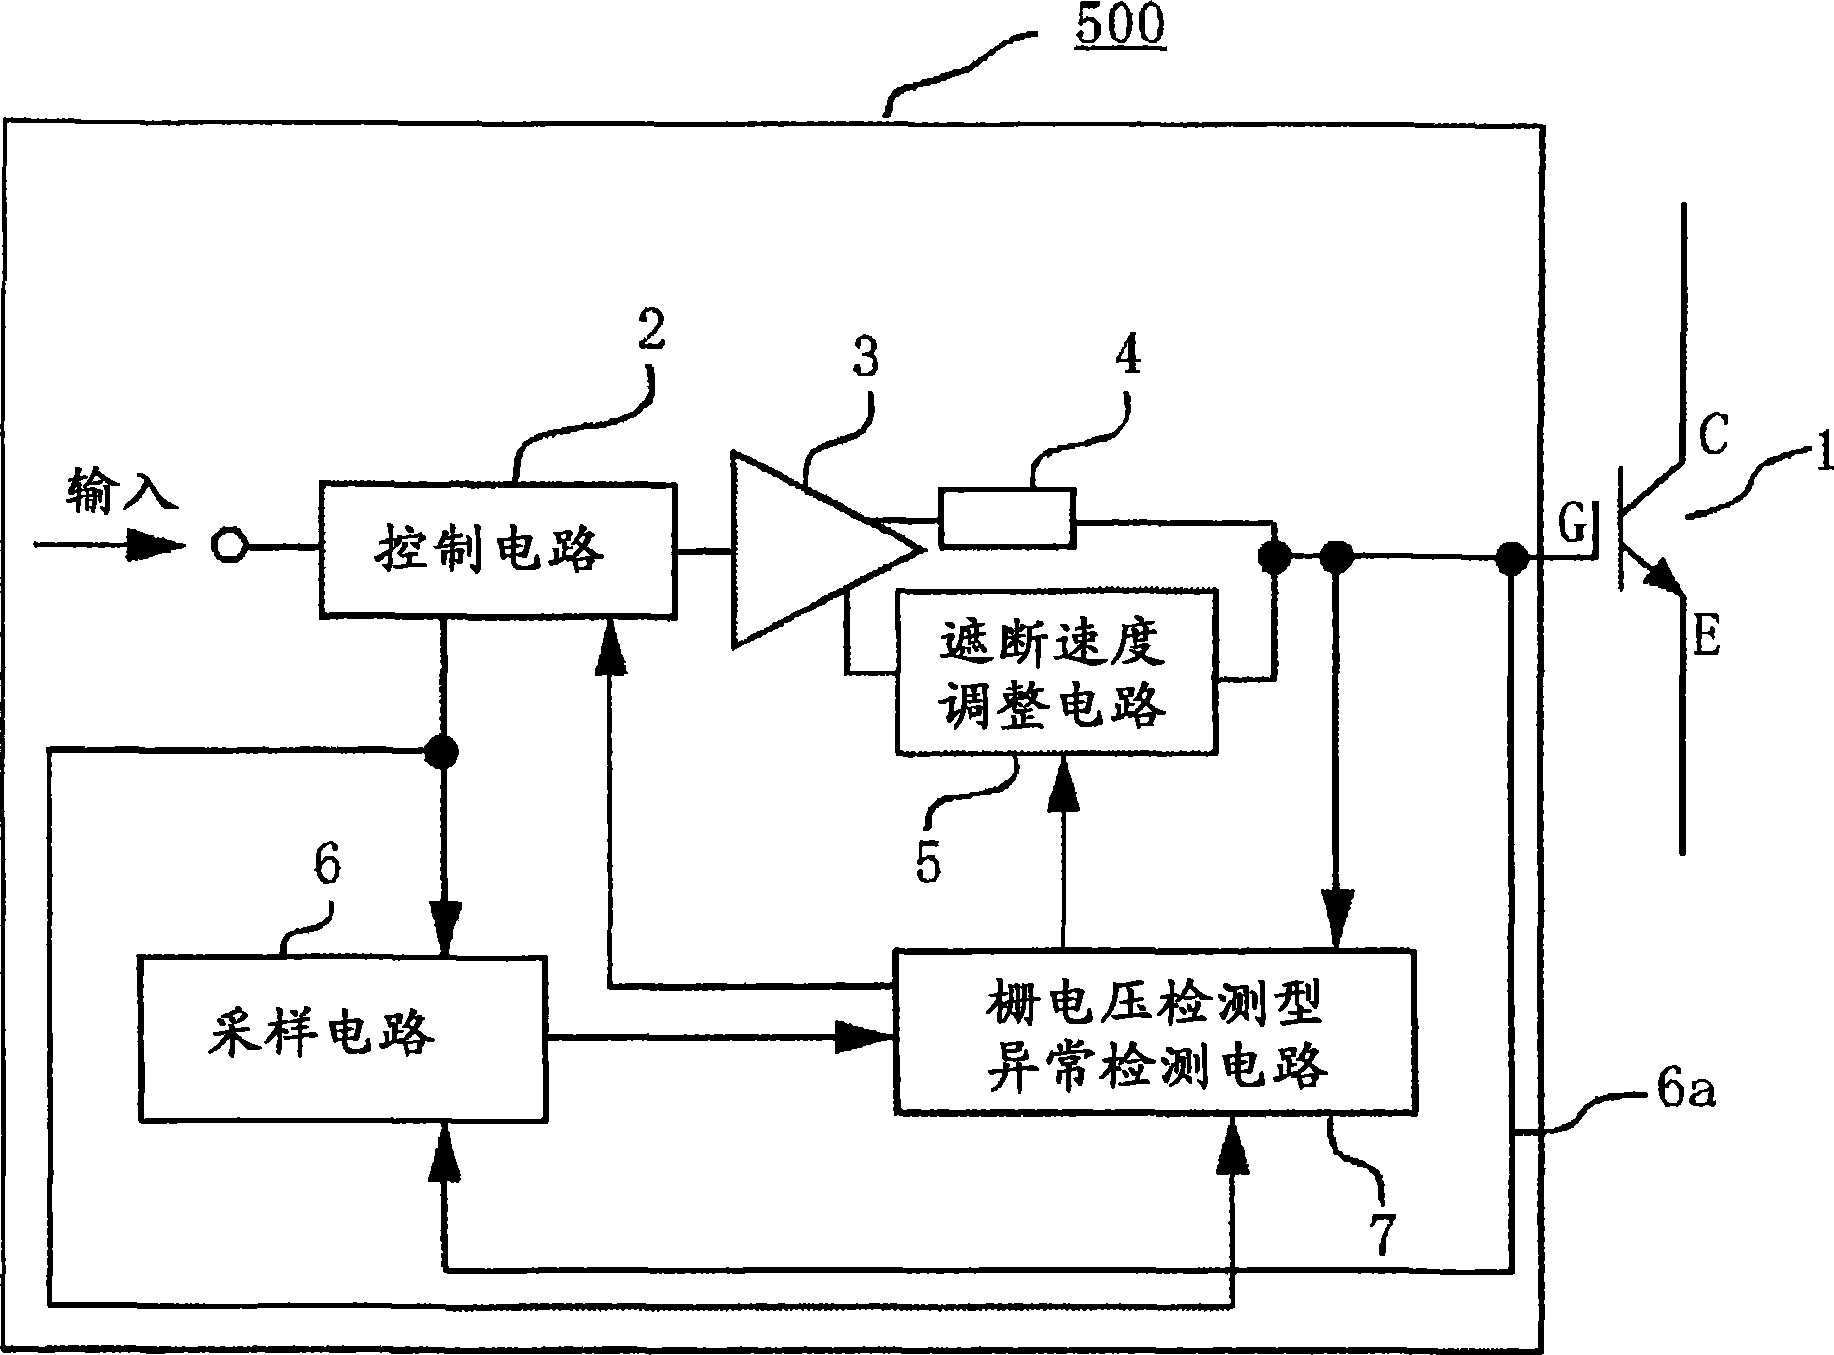 Driving circuit for semiconductor element